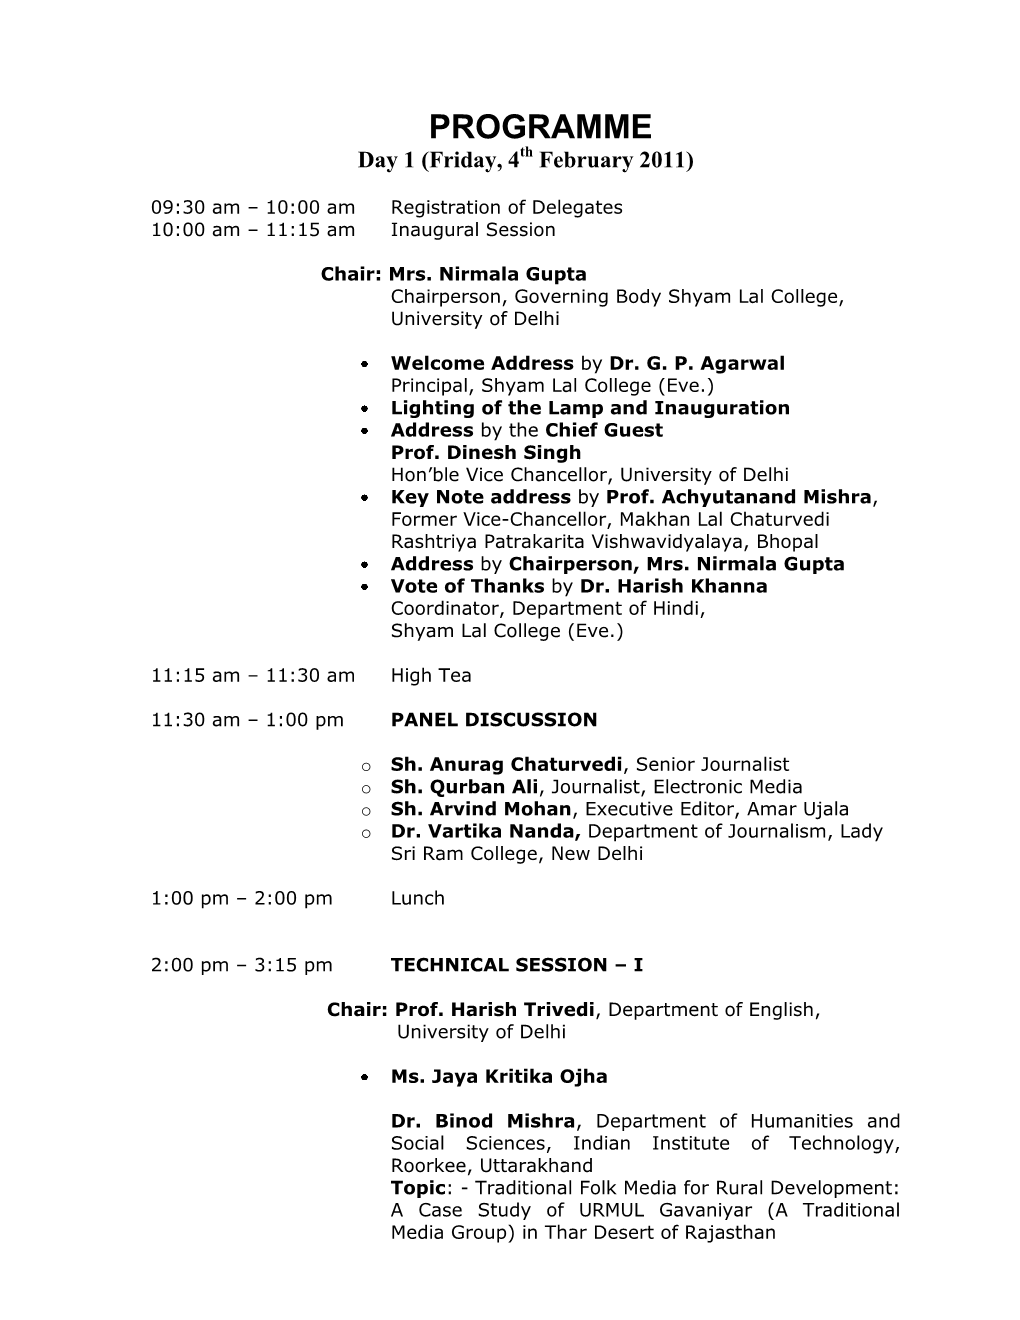 PROGRAMME Day 1 (Friday, 4Th February 2011)